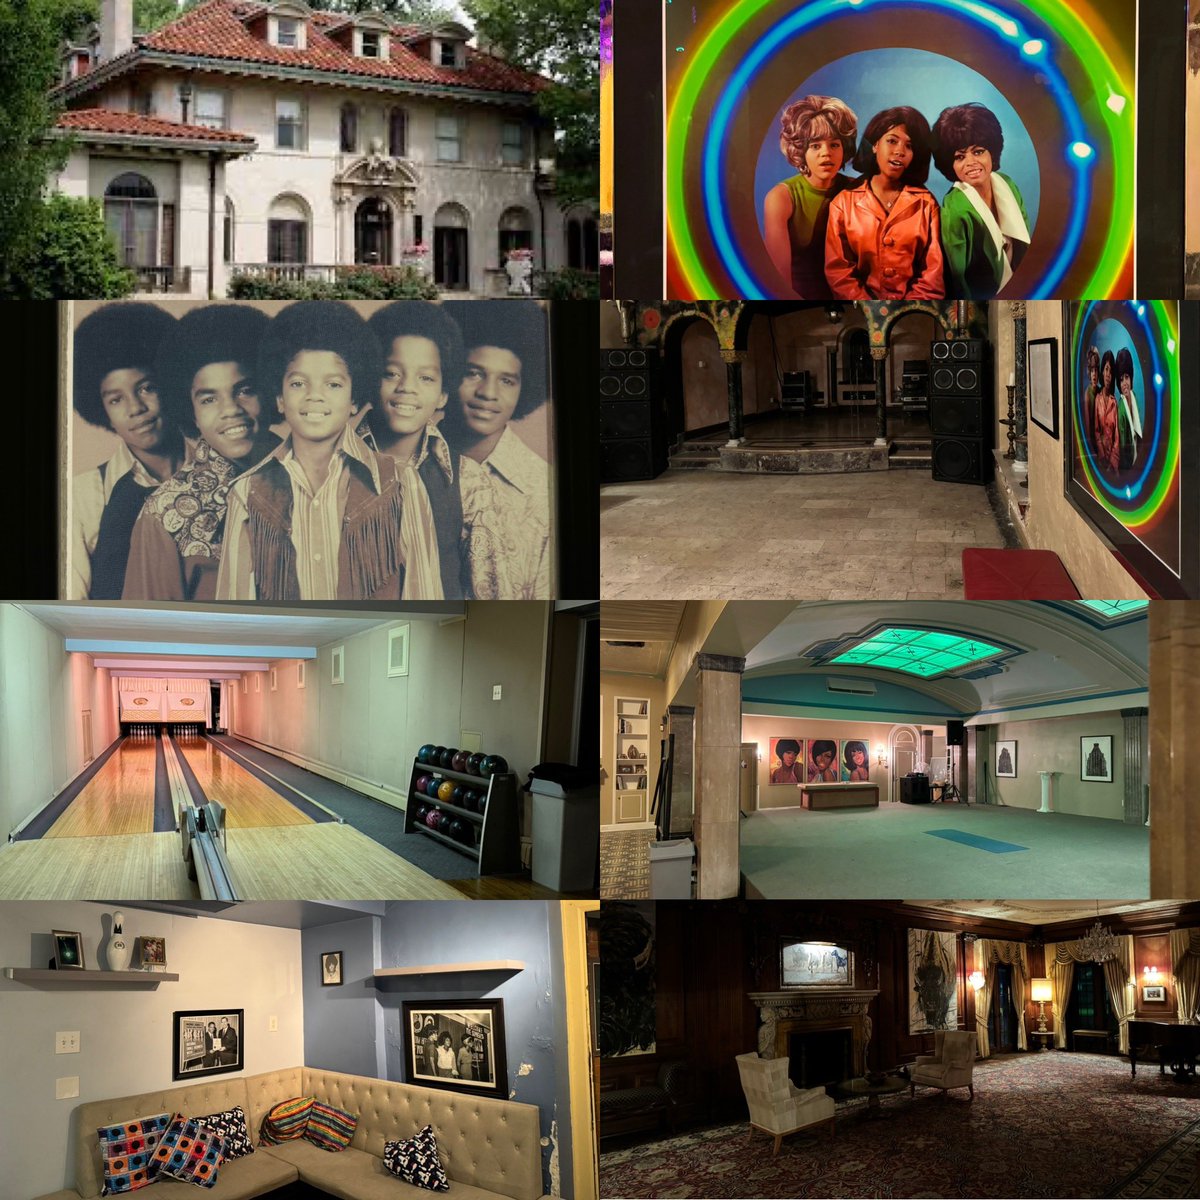 #booktours can be tough on the body. We treated ourselves to a stay at the Berry Gordy Mansion in Detroit. So much fun and we learned a lot! @littlebrown